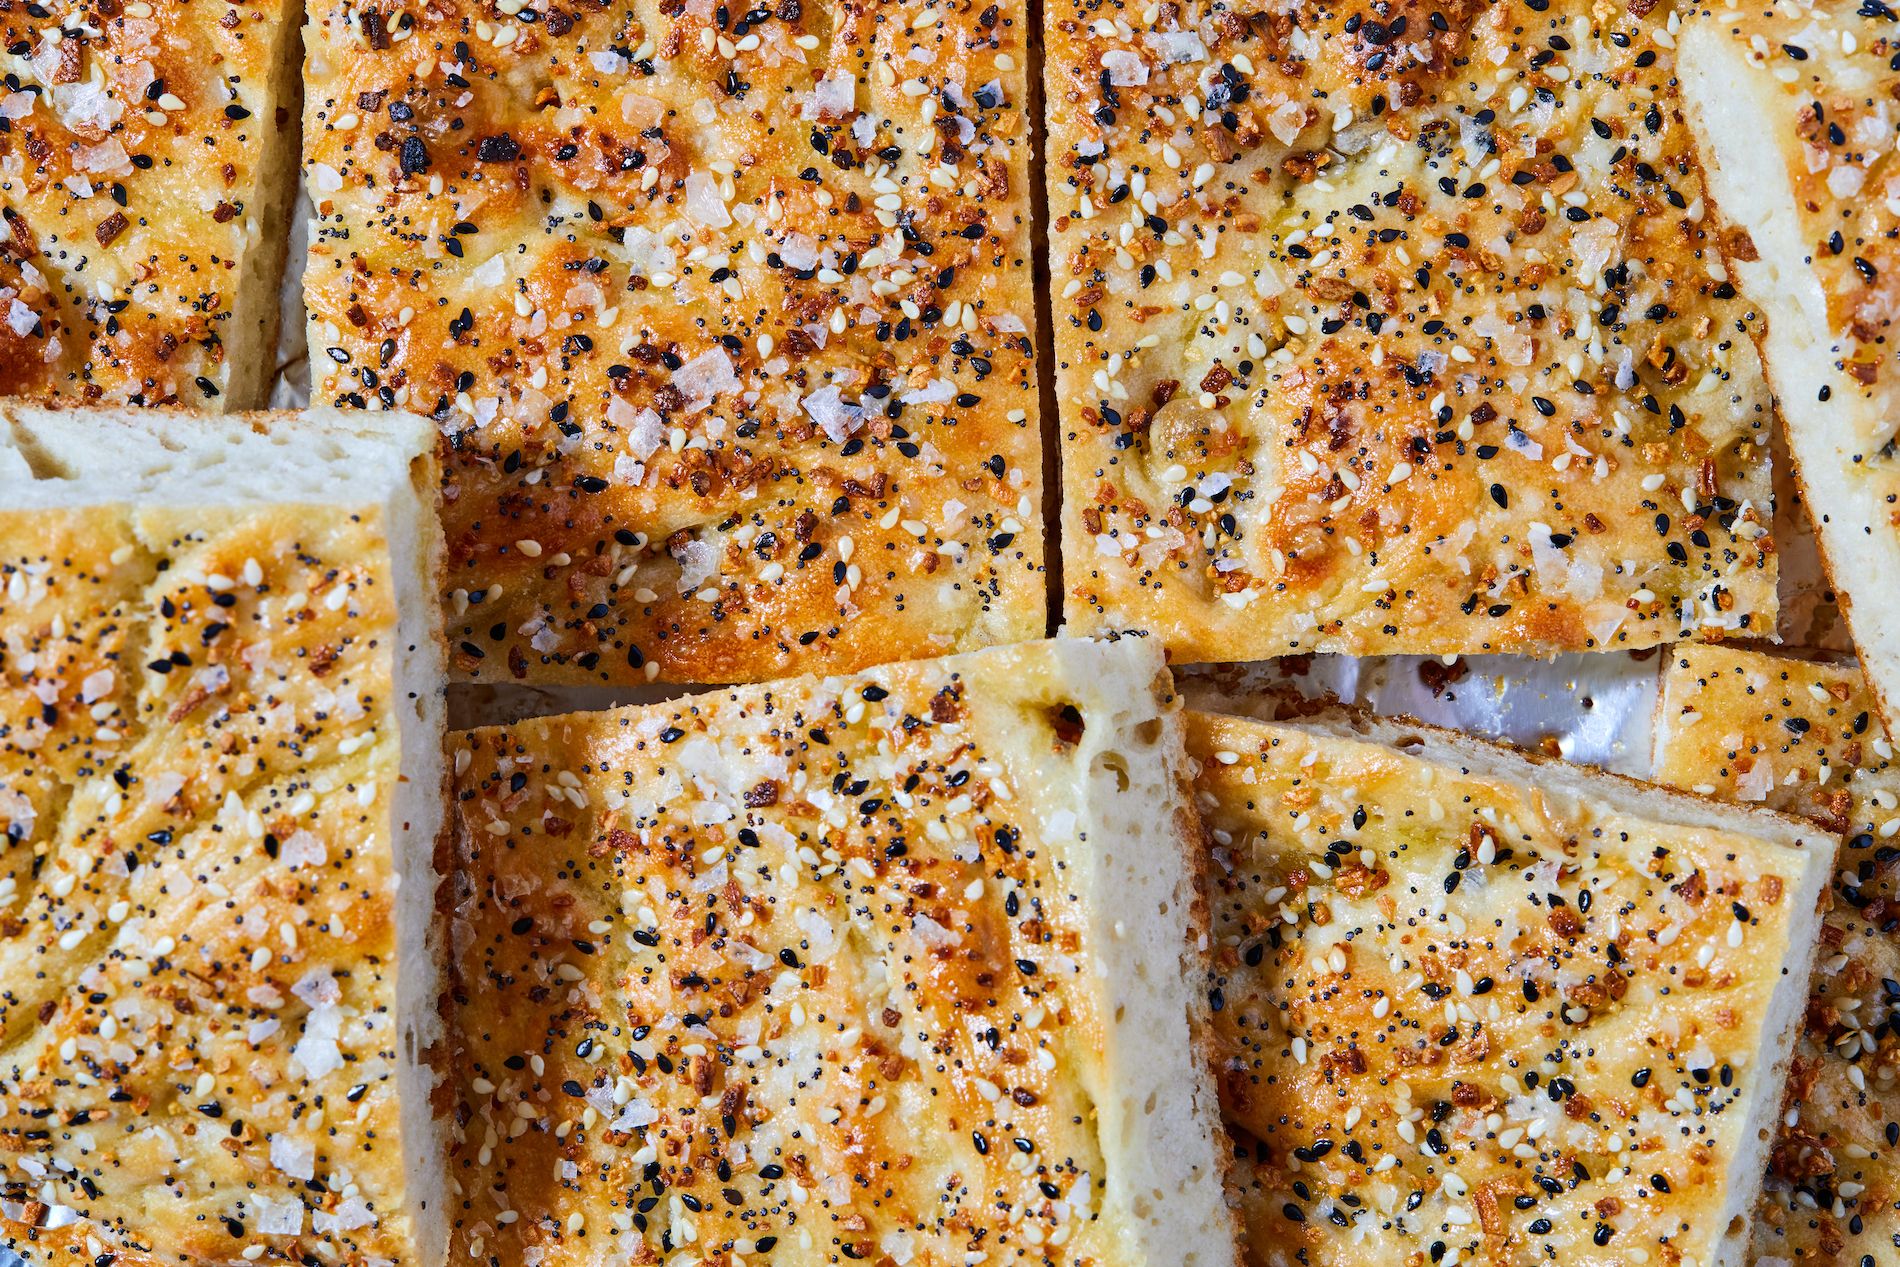 Focaccia Bread With Everything Bagel Seasoning From Trader Joe's - Sip Bite  Go